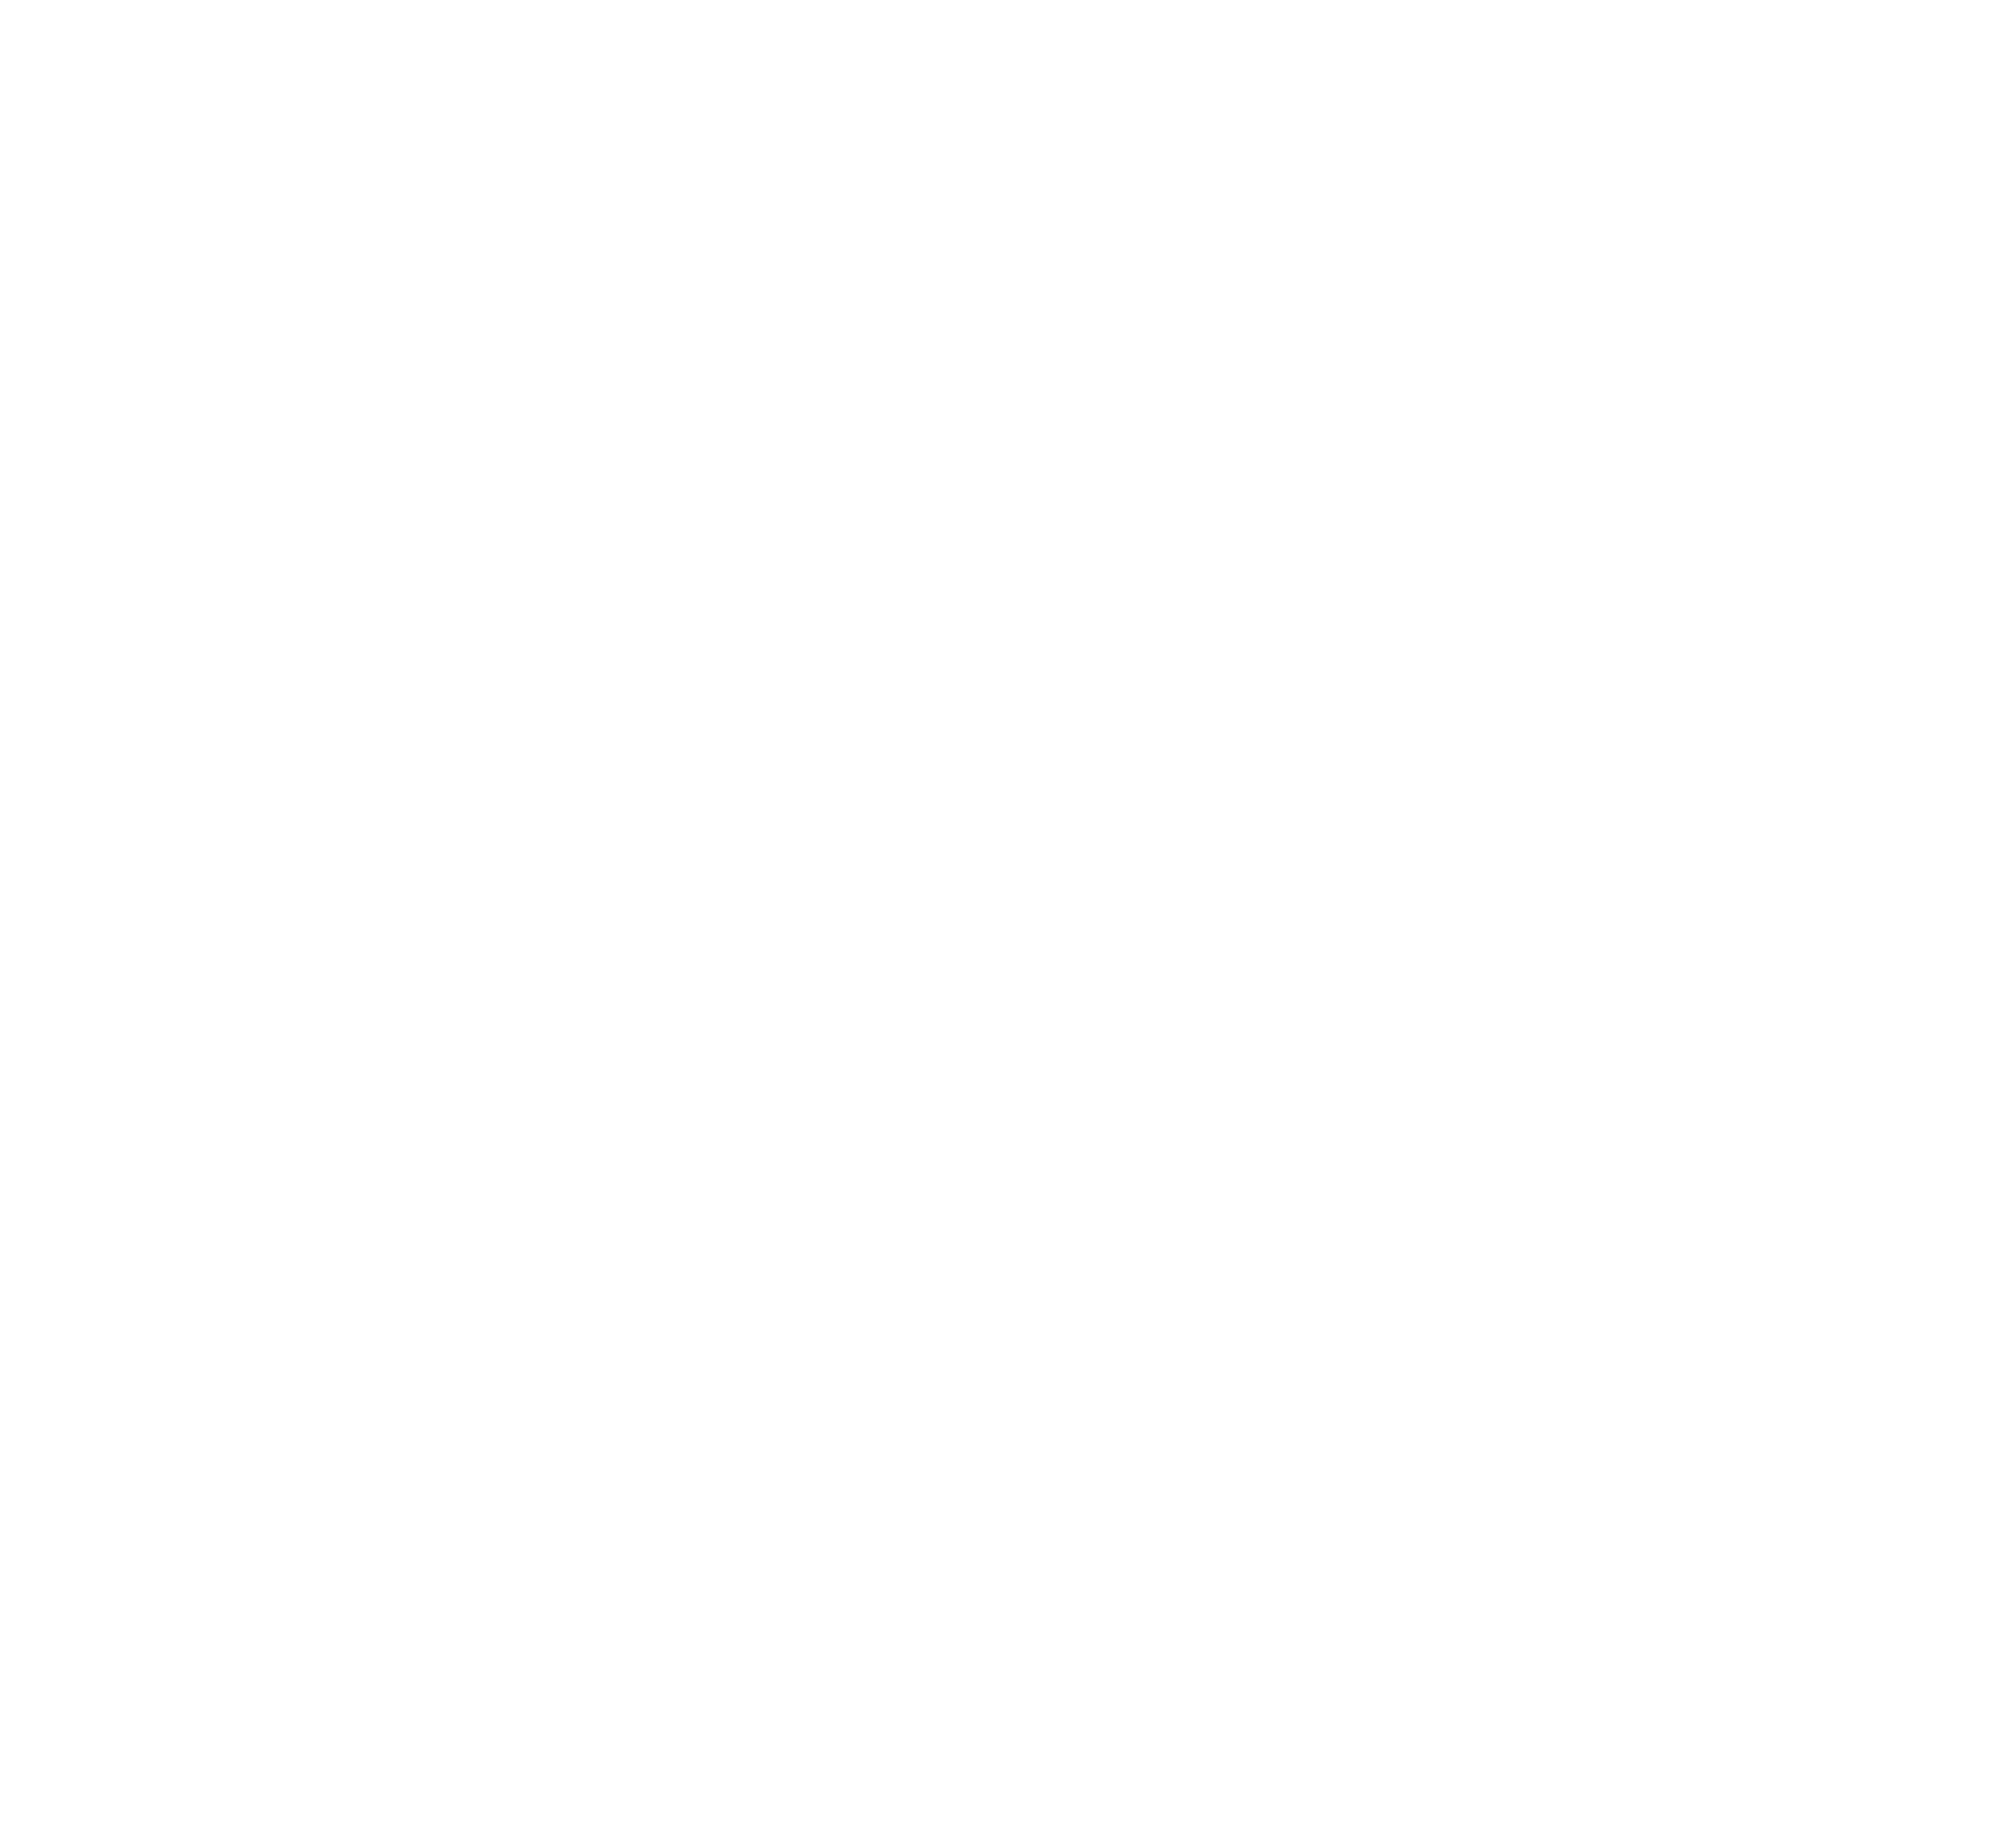 Elements Eatery is shortlisted for the 2023 Mornington Peninsula Business Excellence Awards.